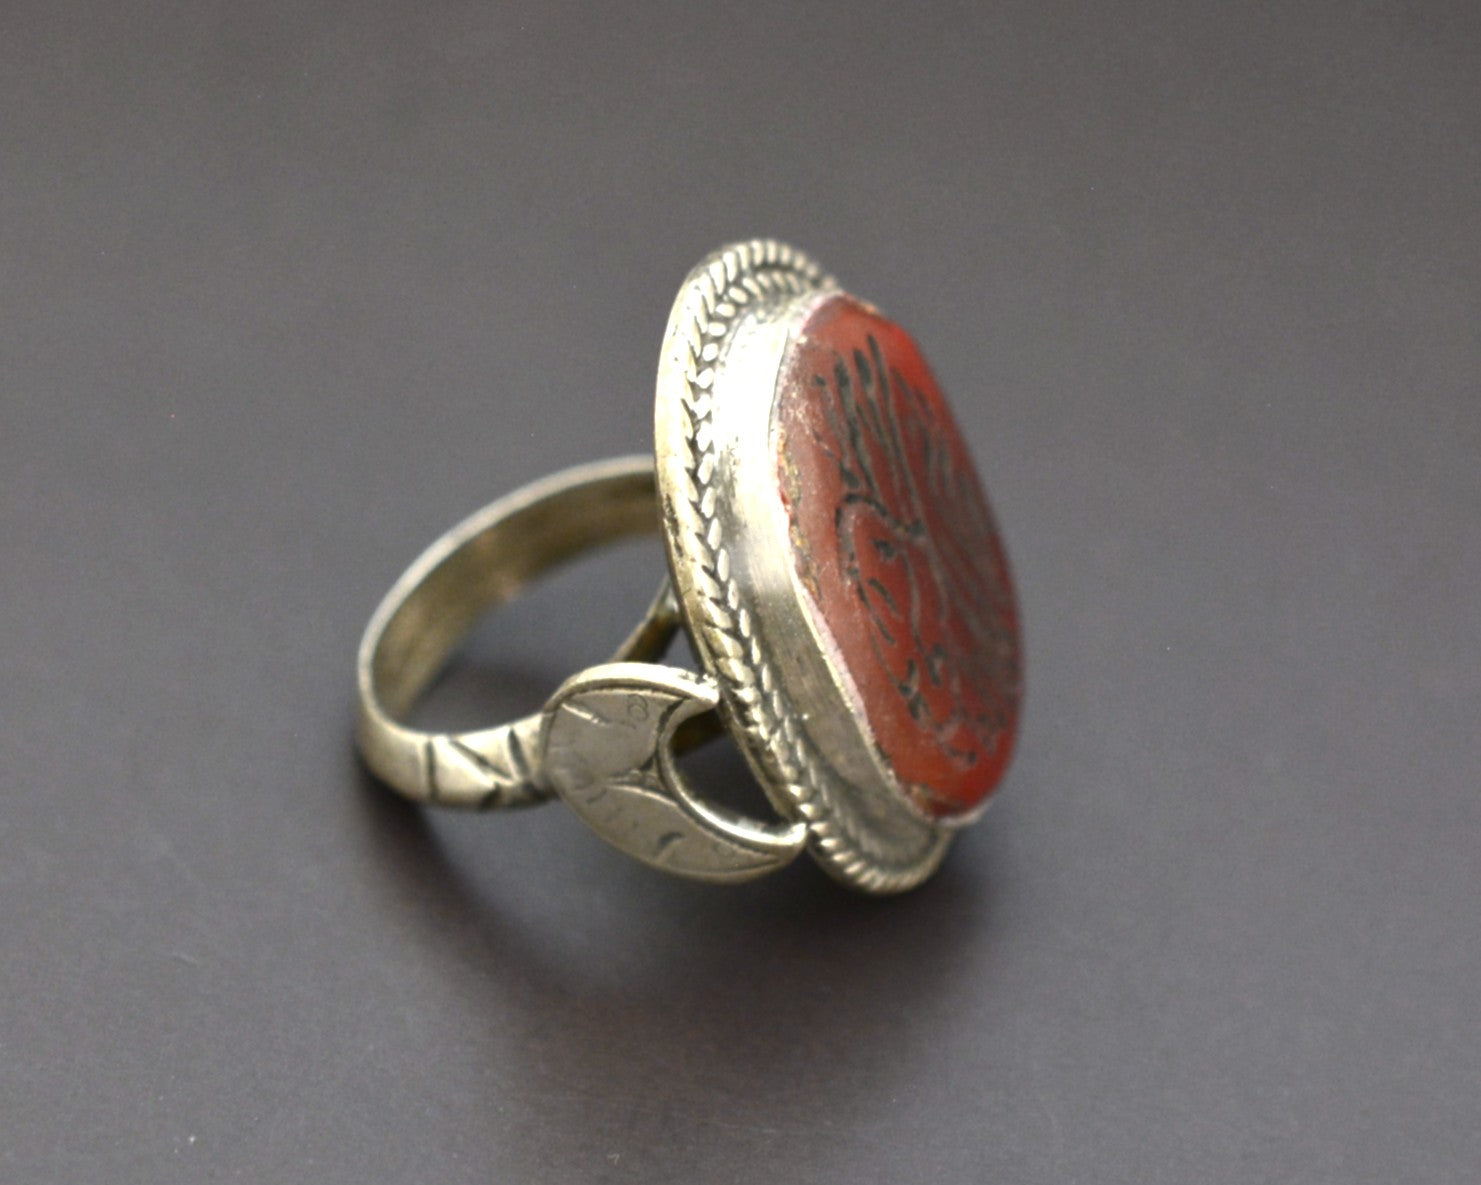 Afghani Carnelian Intaglio Ring with Crescent Moons - Size 7.5